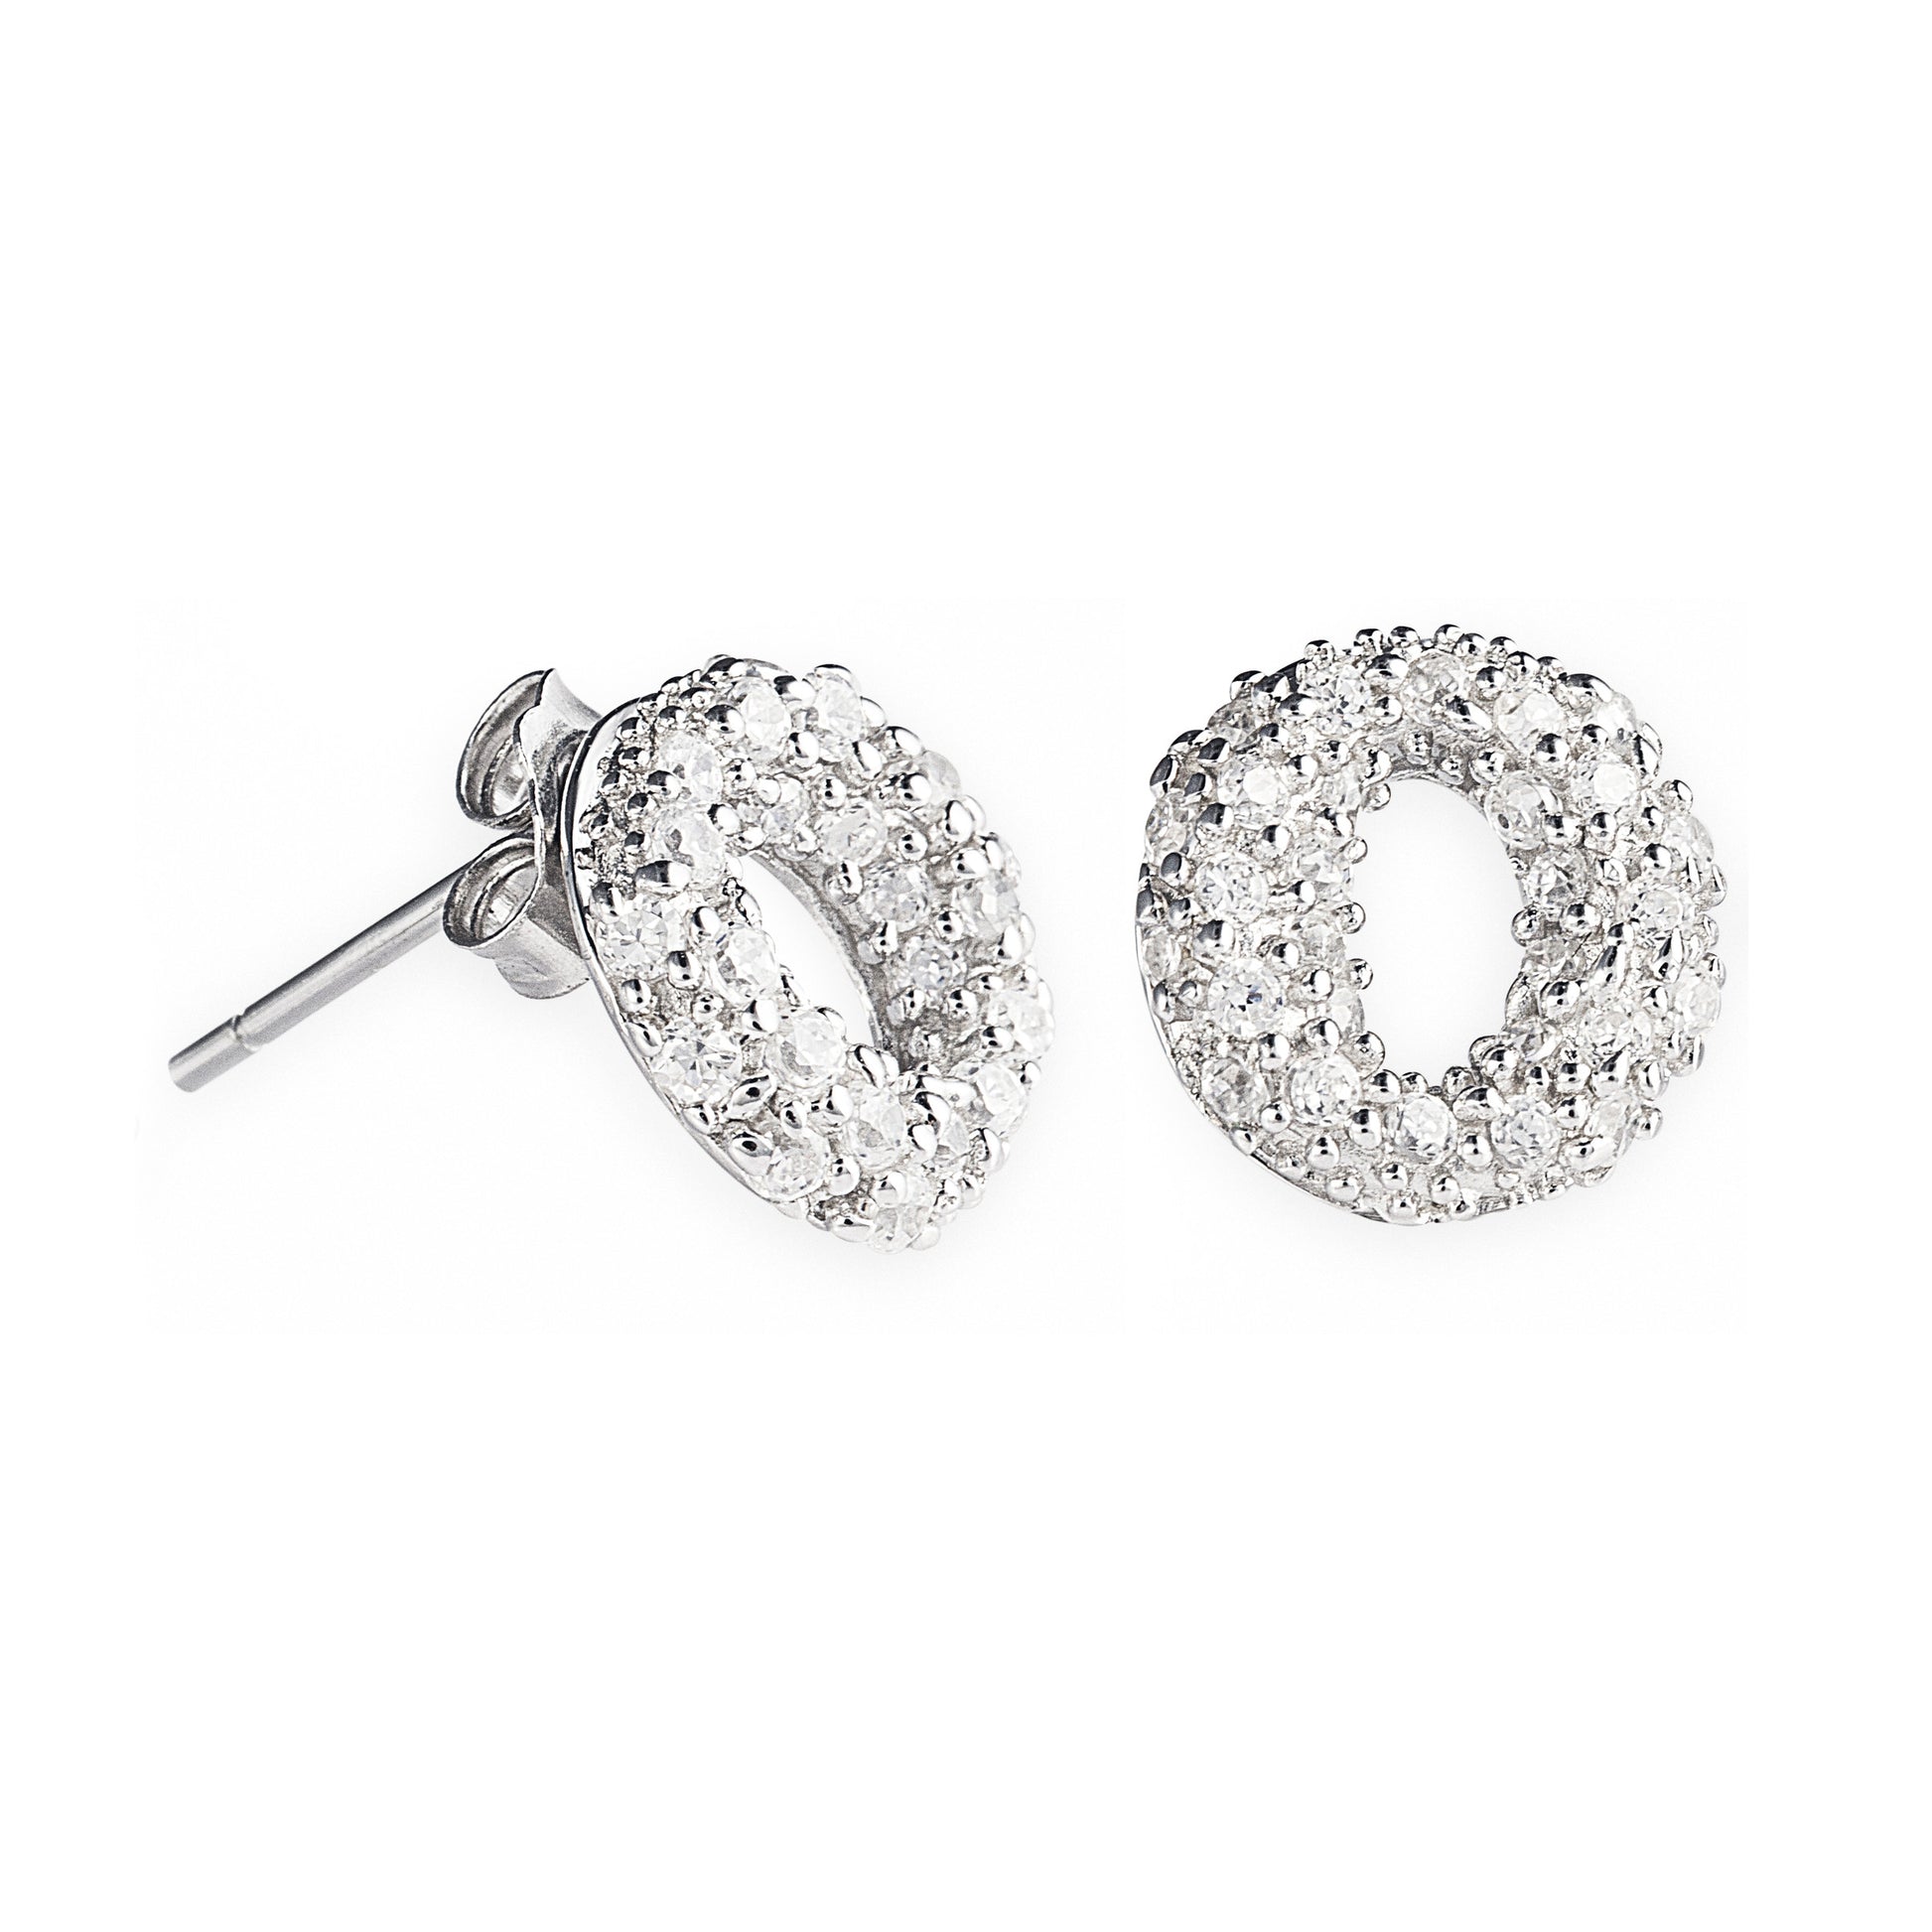 Lana Sparkly Stud Earrings in 925 Sterling Silver in 'O' Shape with Cubic Zirconia. Worldwide Shipping.